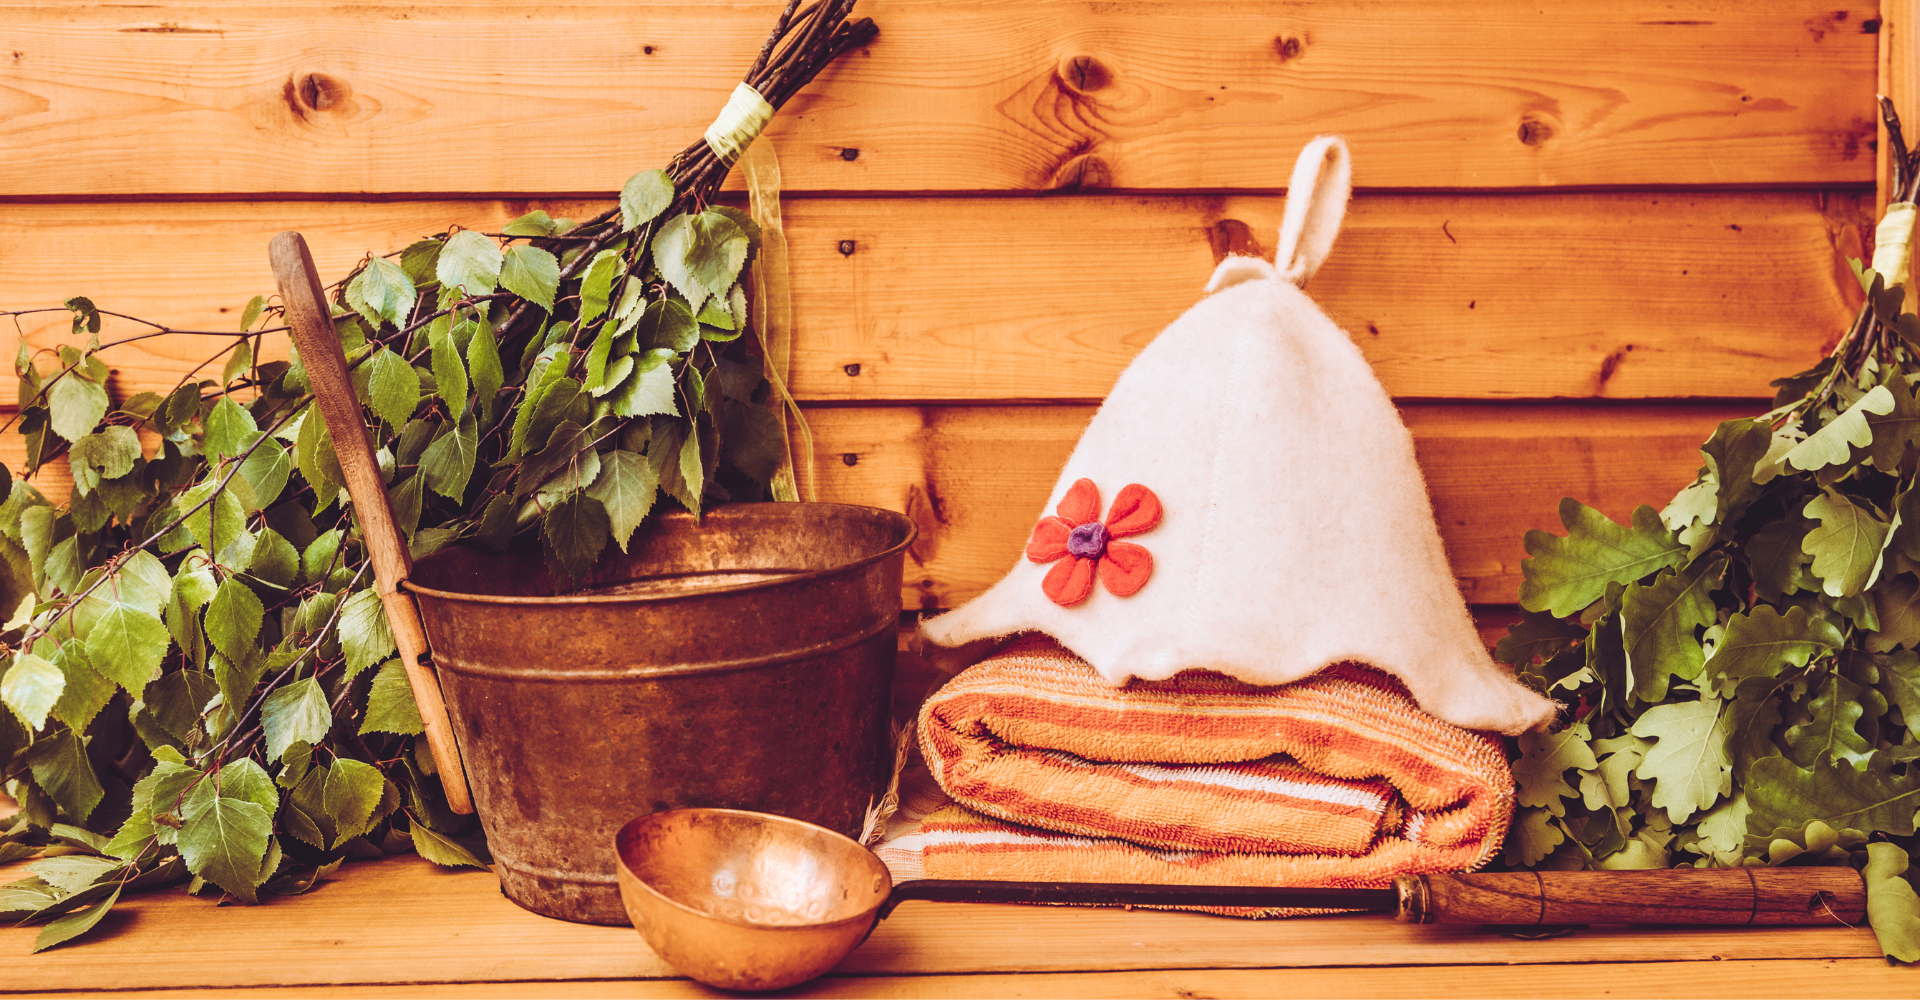 Sauna Immunity Boost: How to Use a Sauna for Cold and Flu Relief